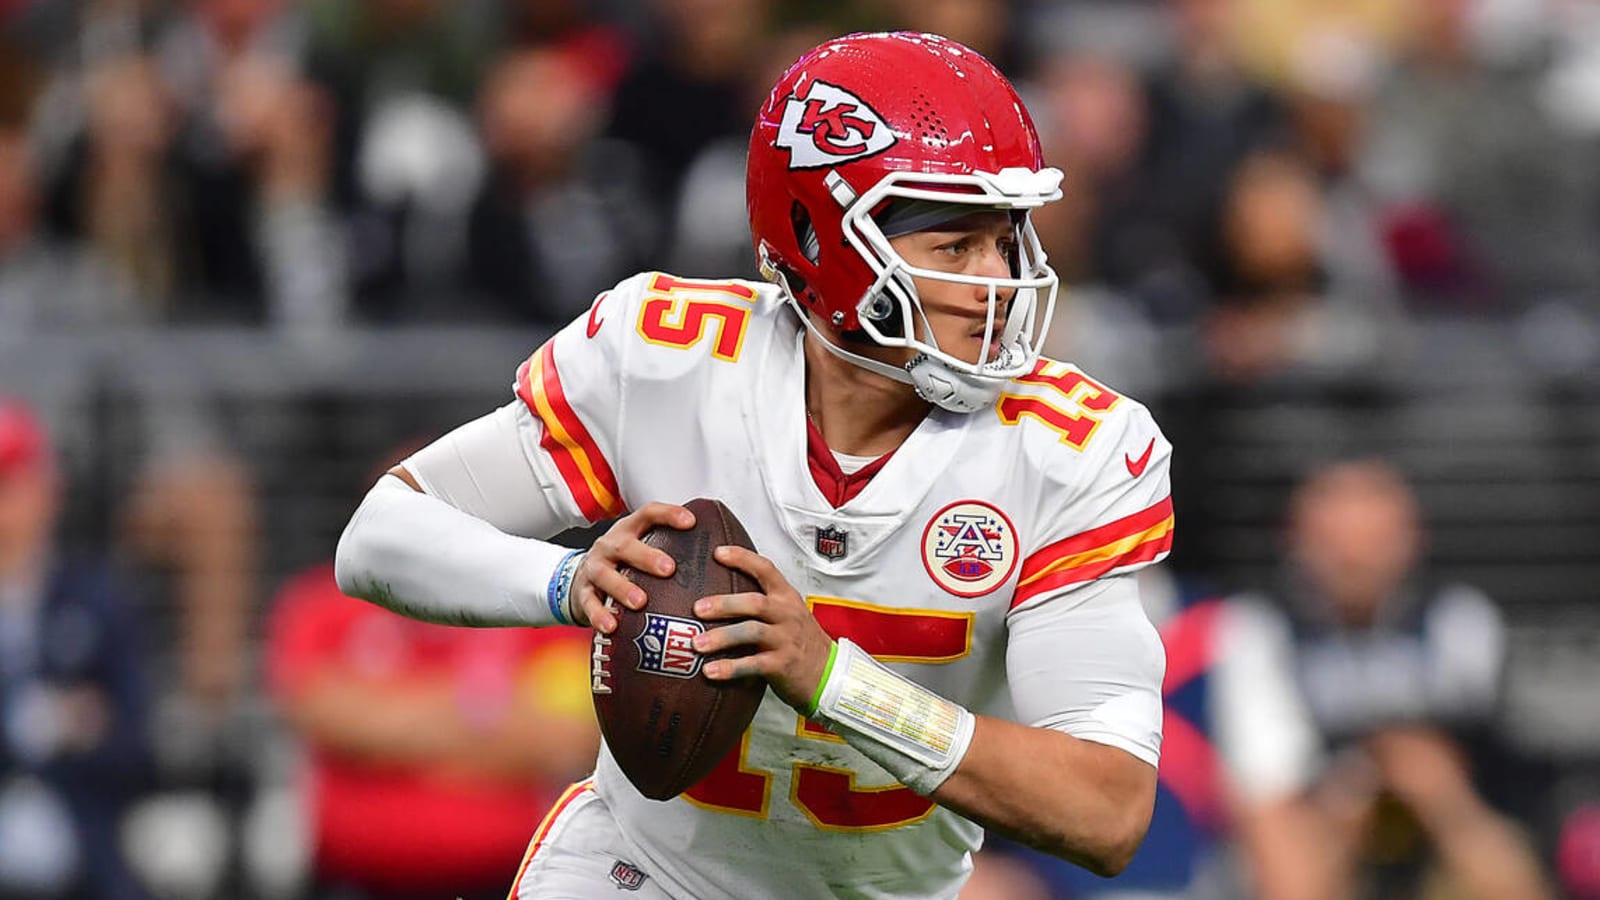 Andy Reid provides big update on Patrick Mahomes’ status for AFC Championship